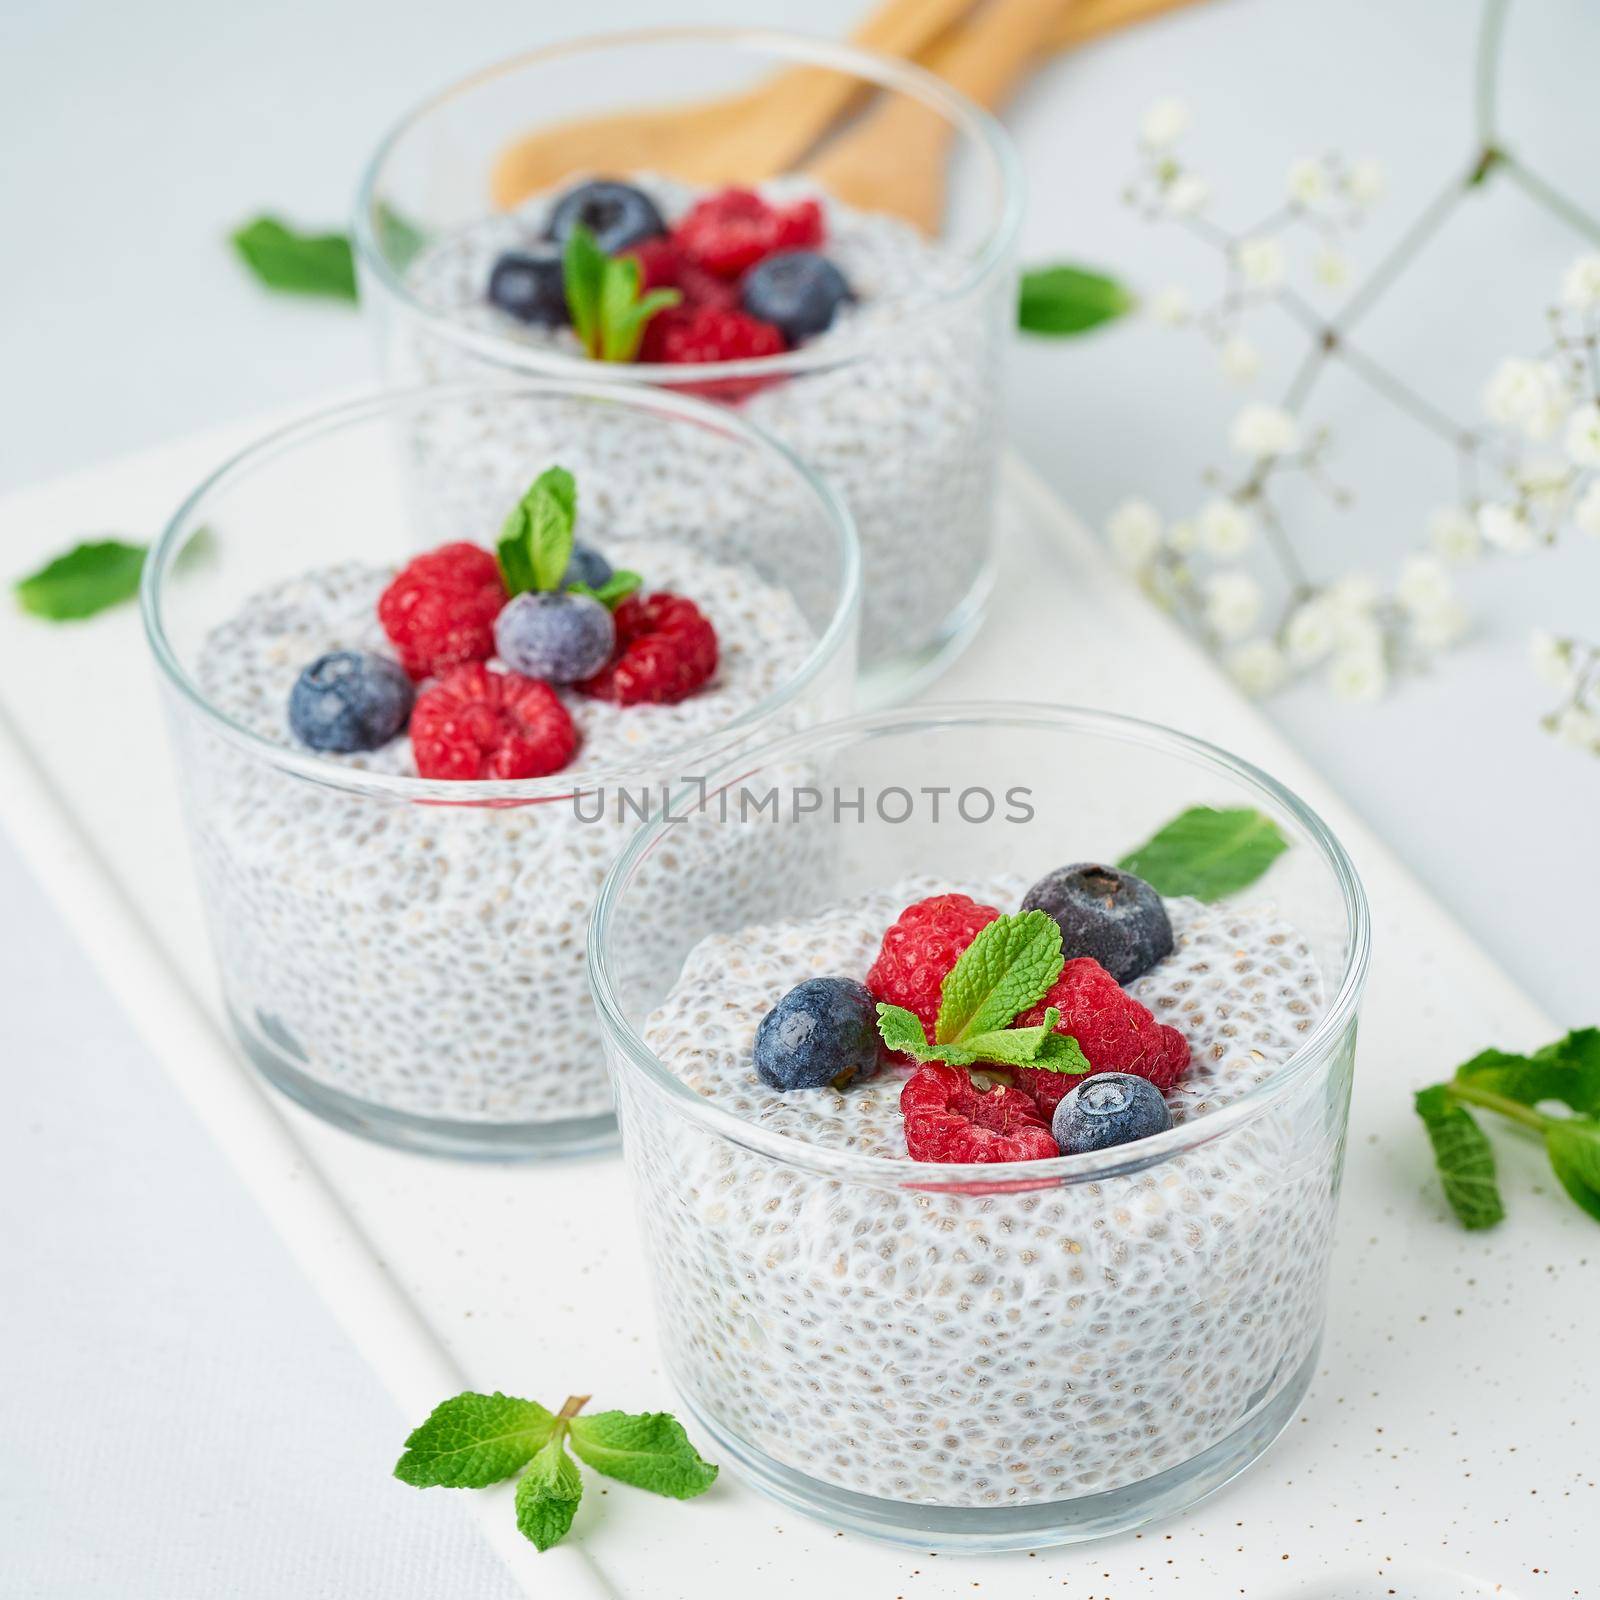 Chia pudding with fresh berries raspberries, blueberries. Three glass, light background, side view, flowers, close up